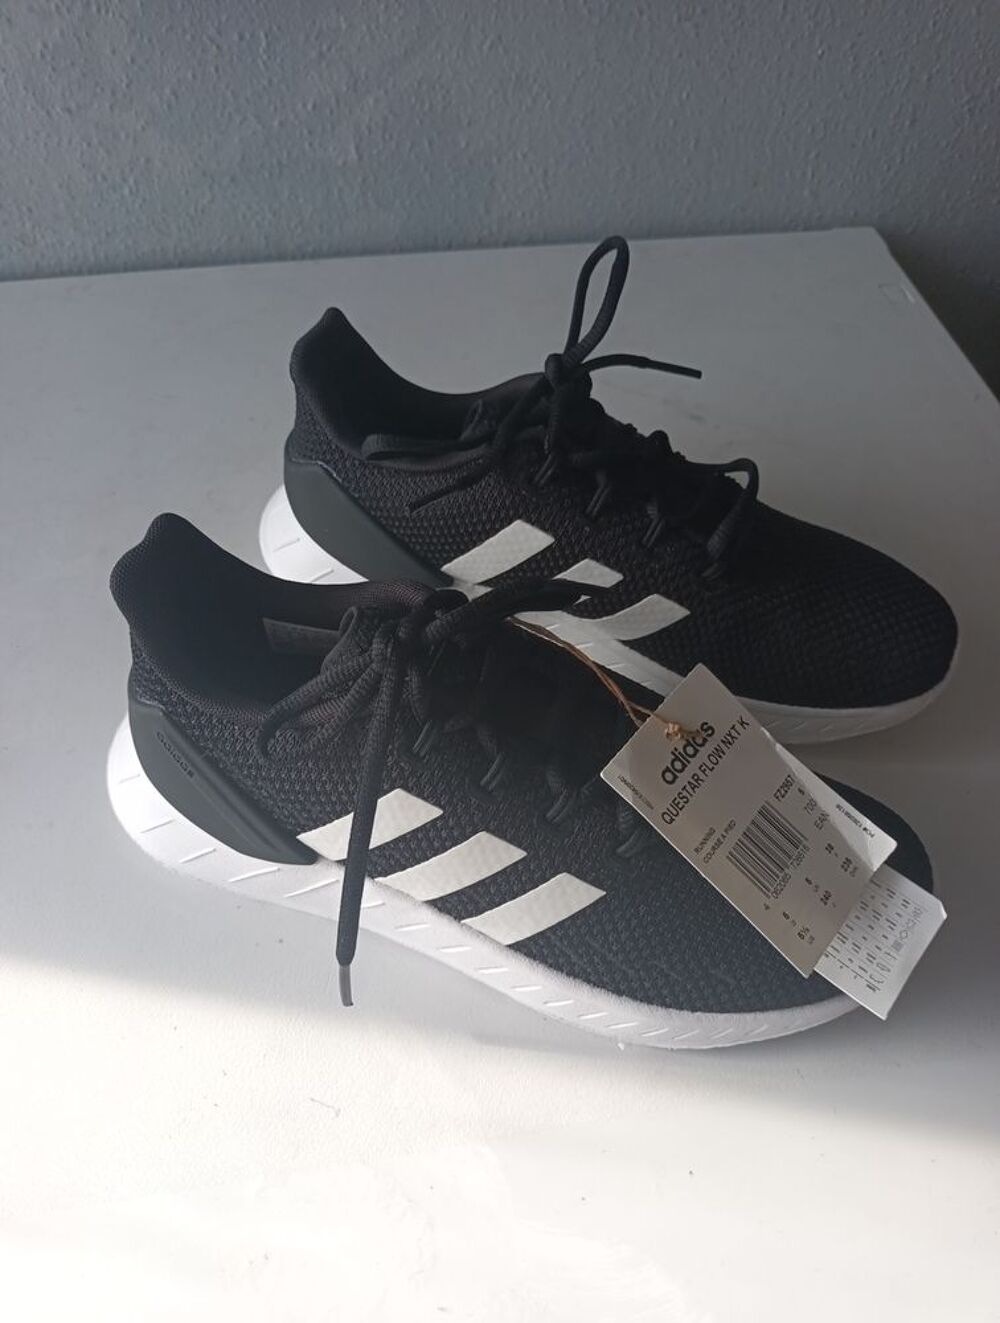 Chaussure Adidas noir Taille 38 Chaussures